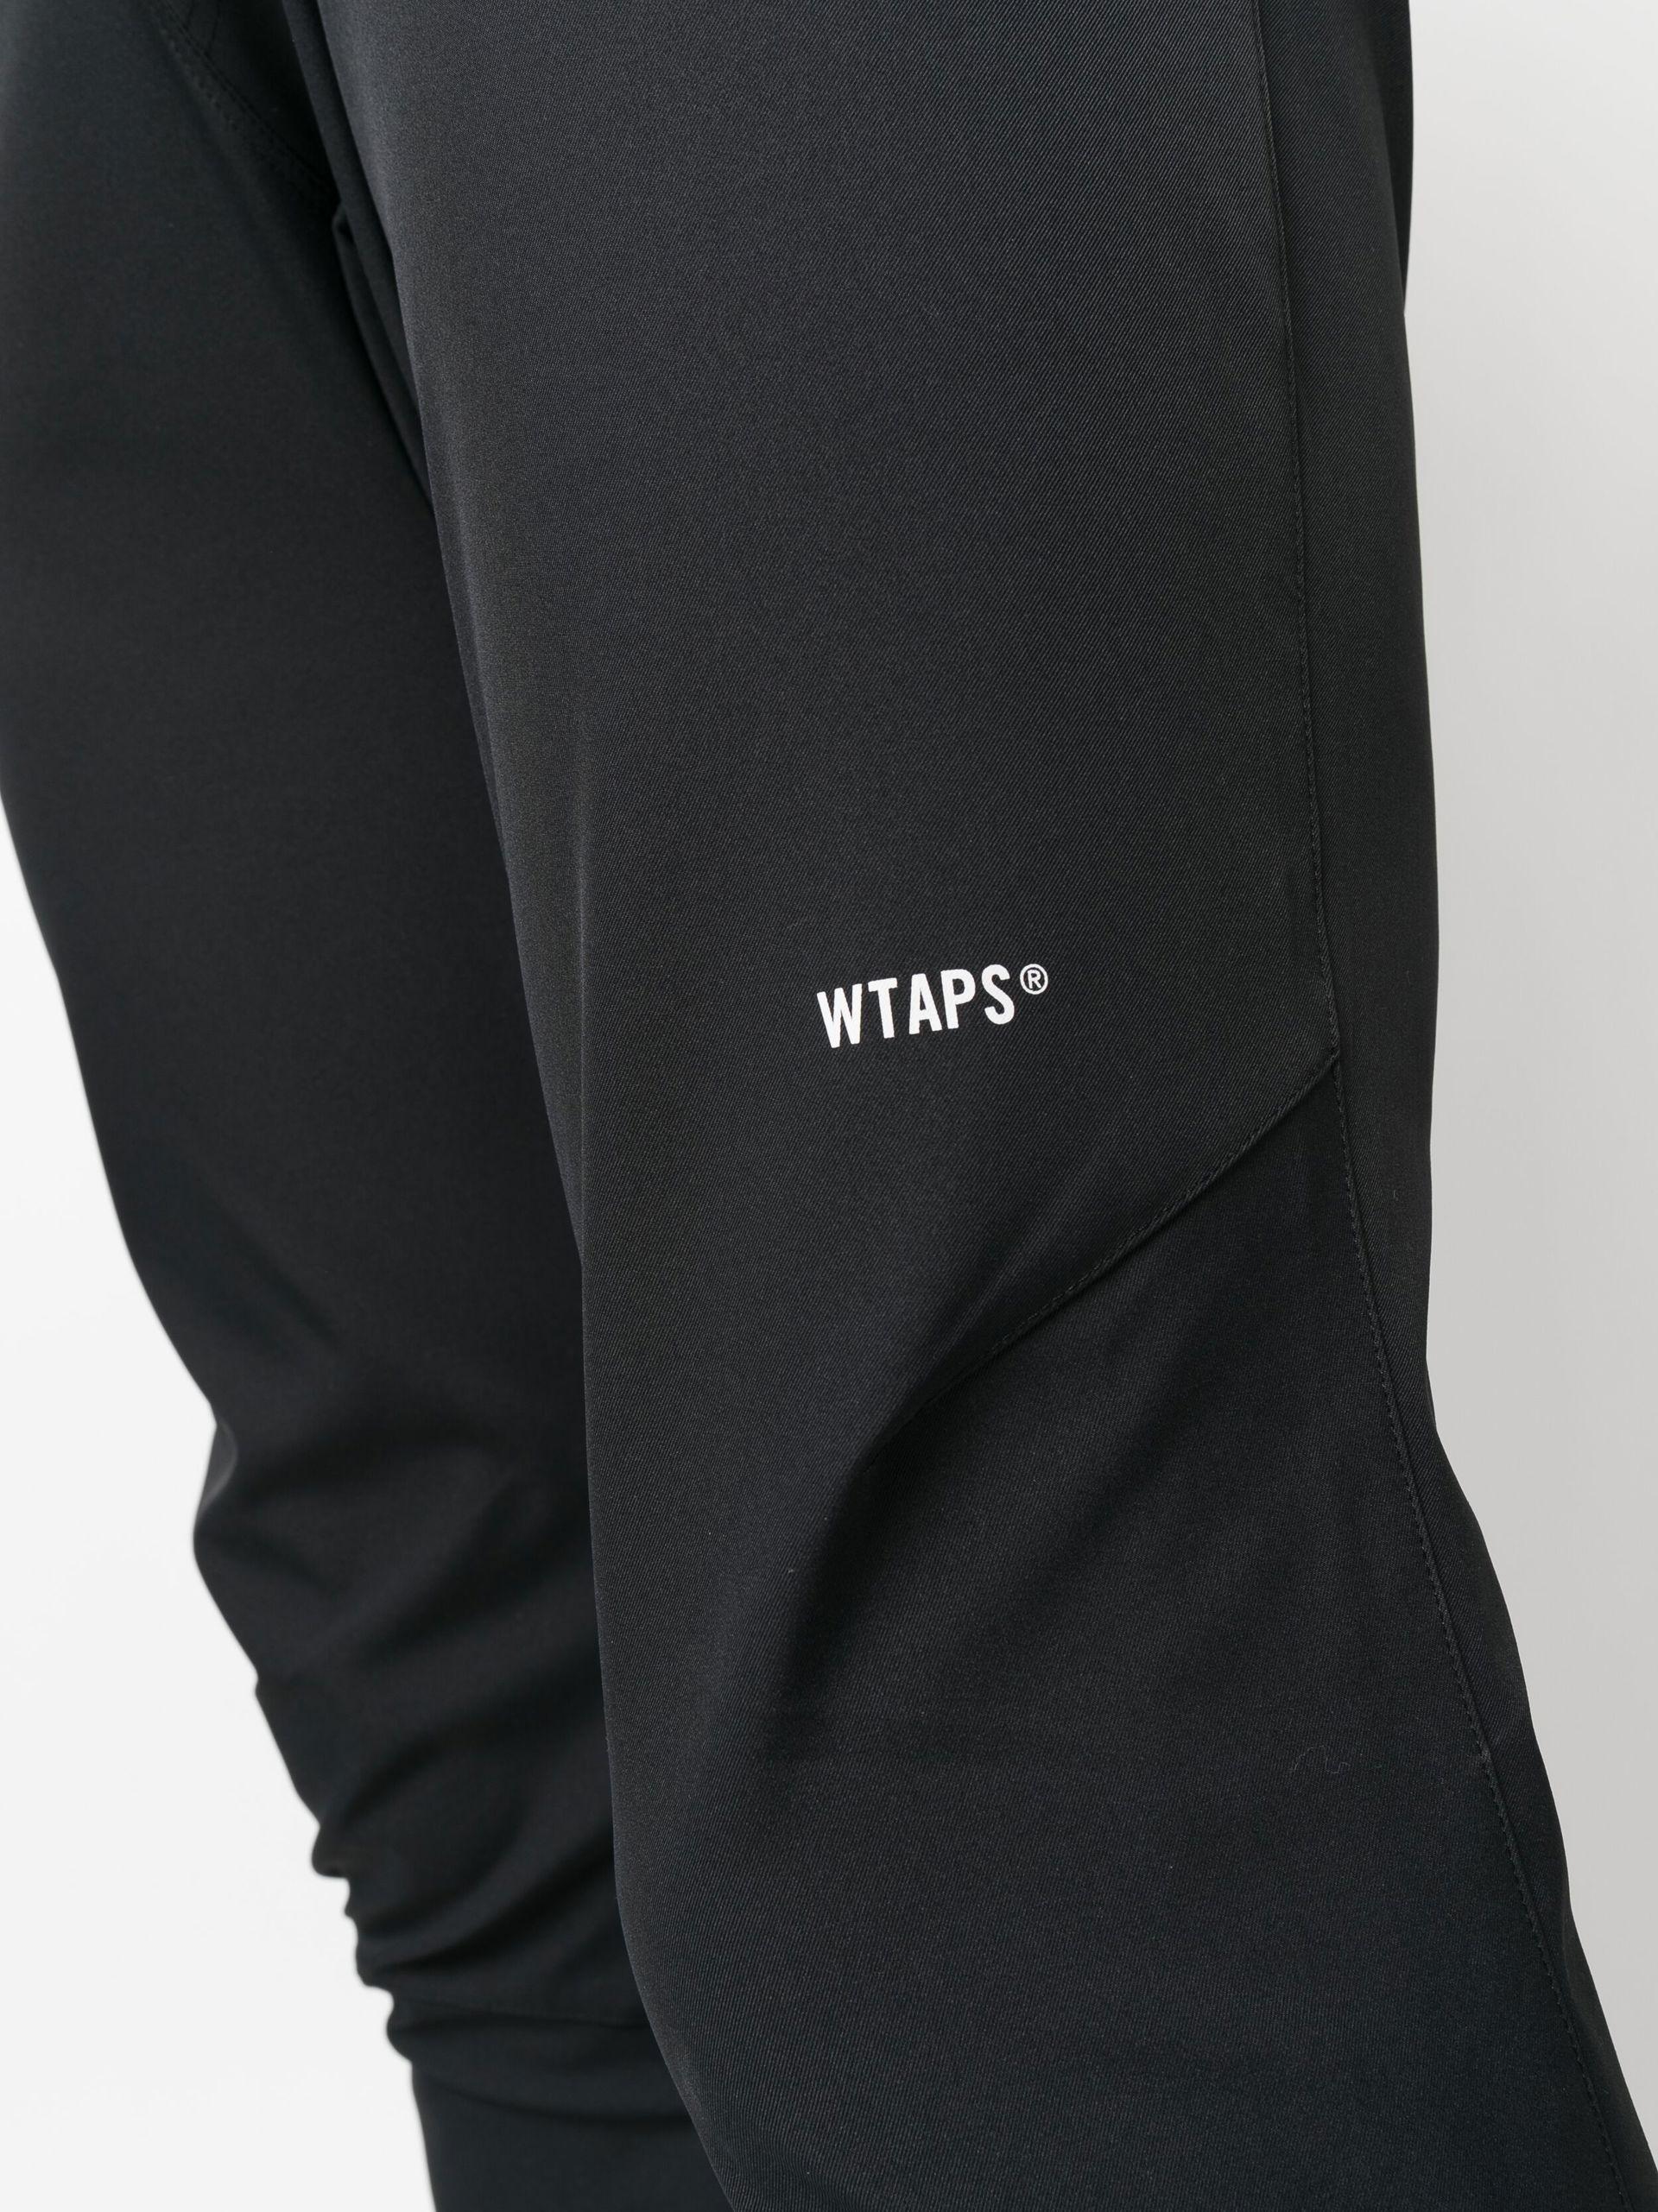 WTAPS BEND / TROUSERS / POLY. TWILL | forext.org.br